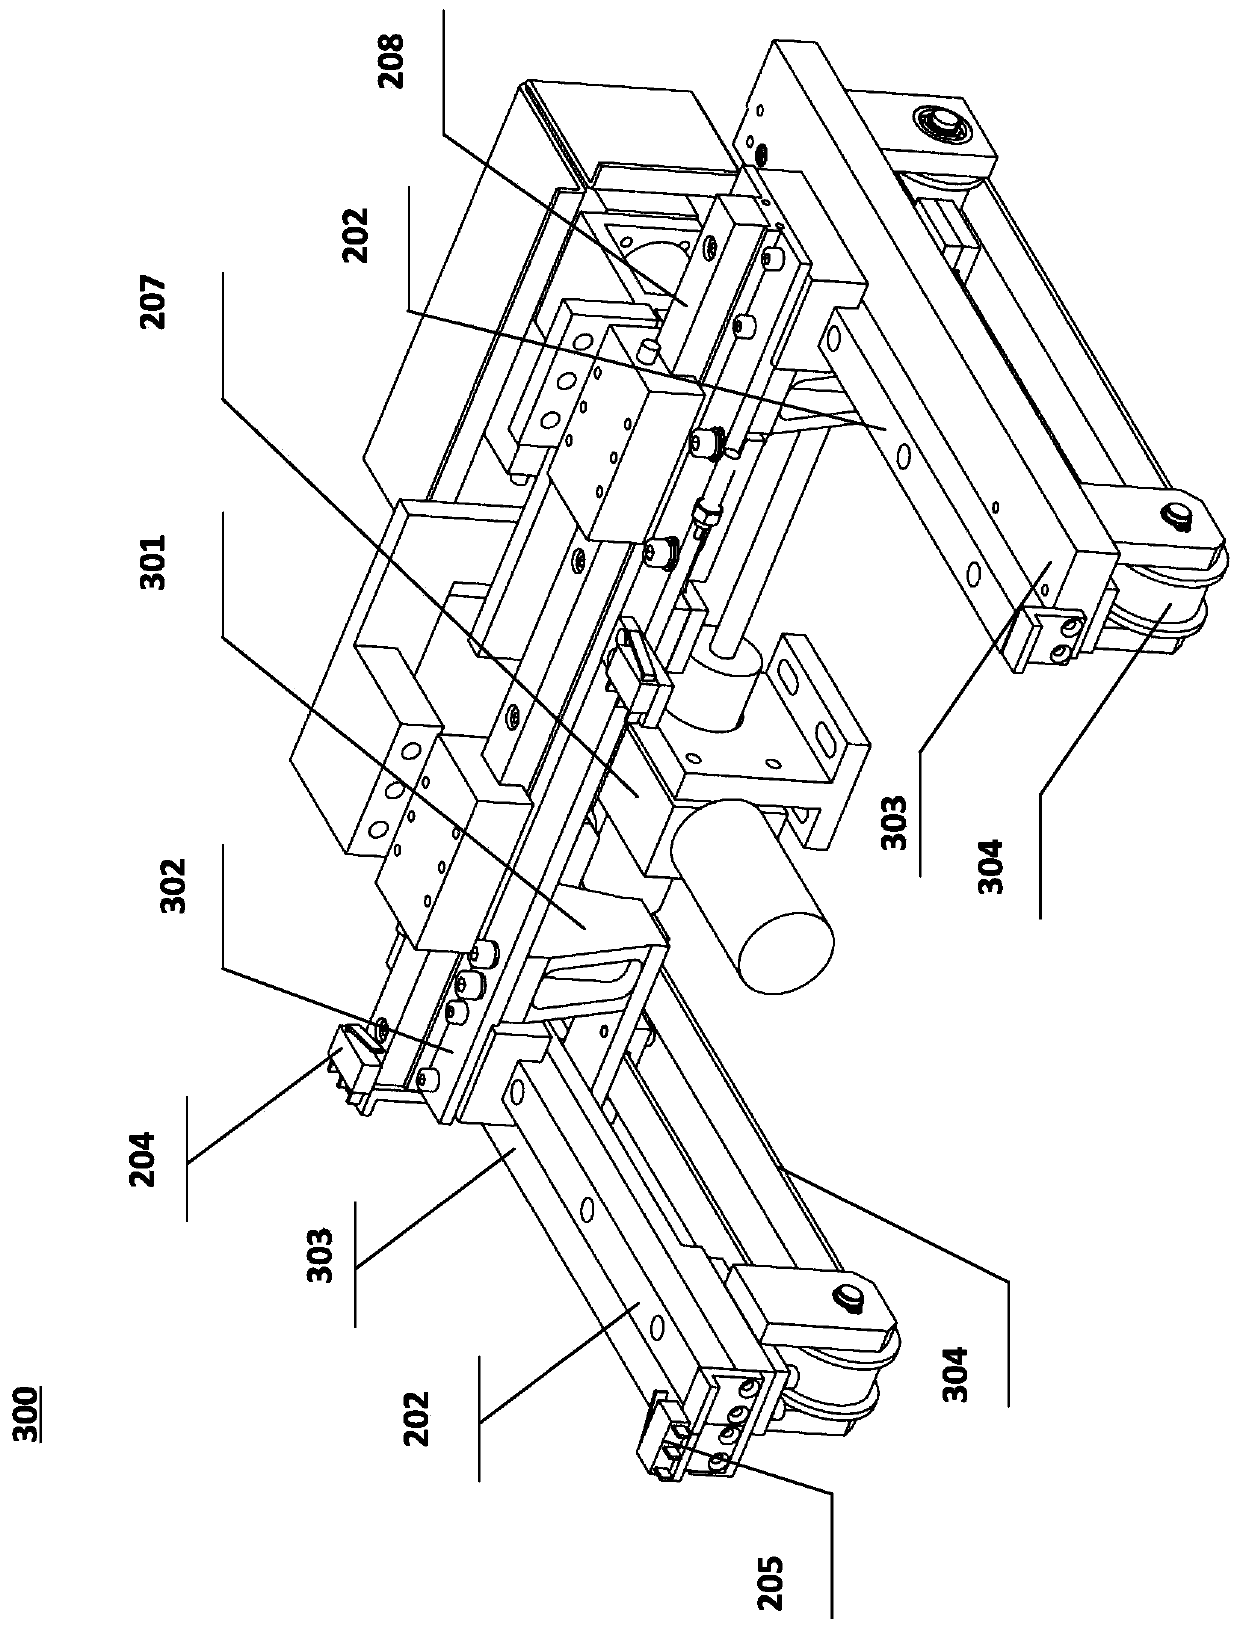 Automatic butt joint and separation device